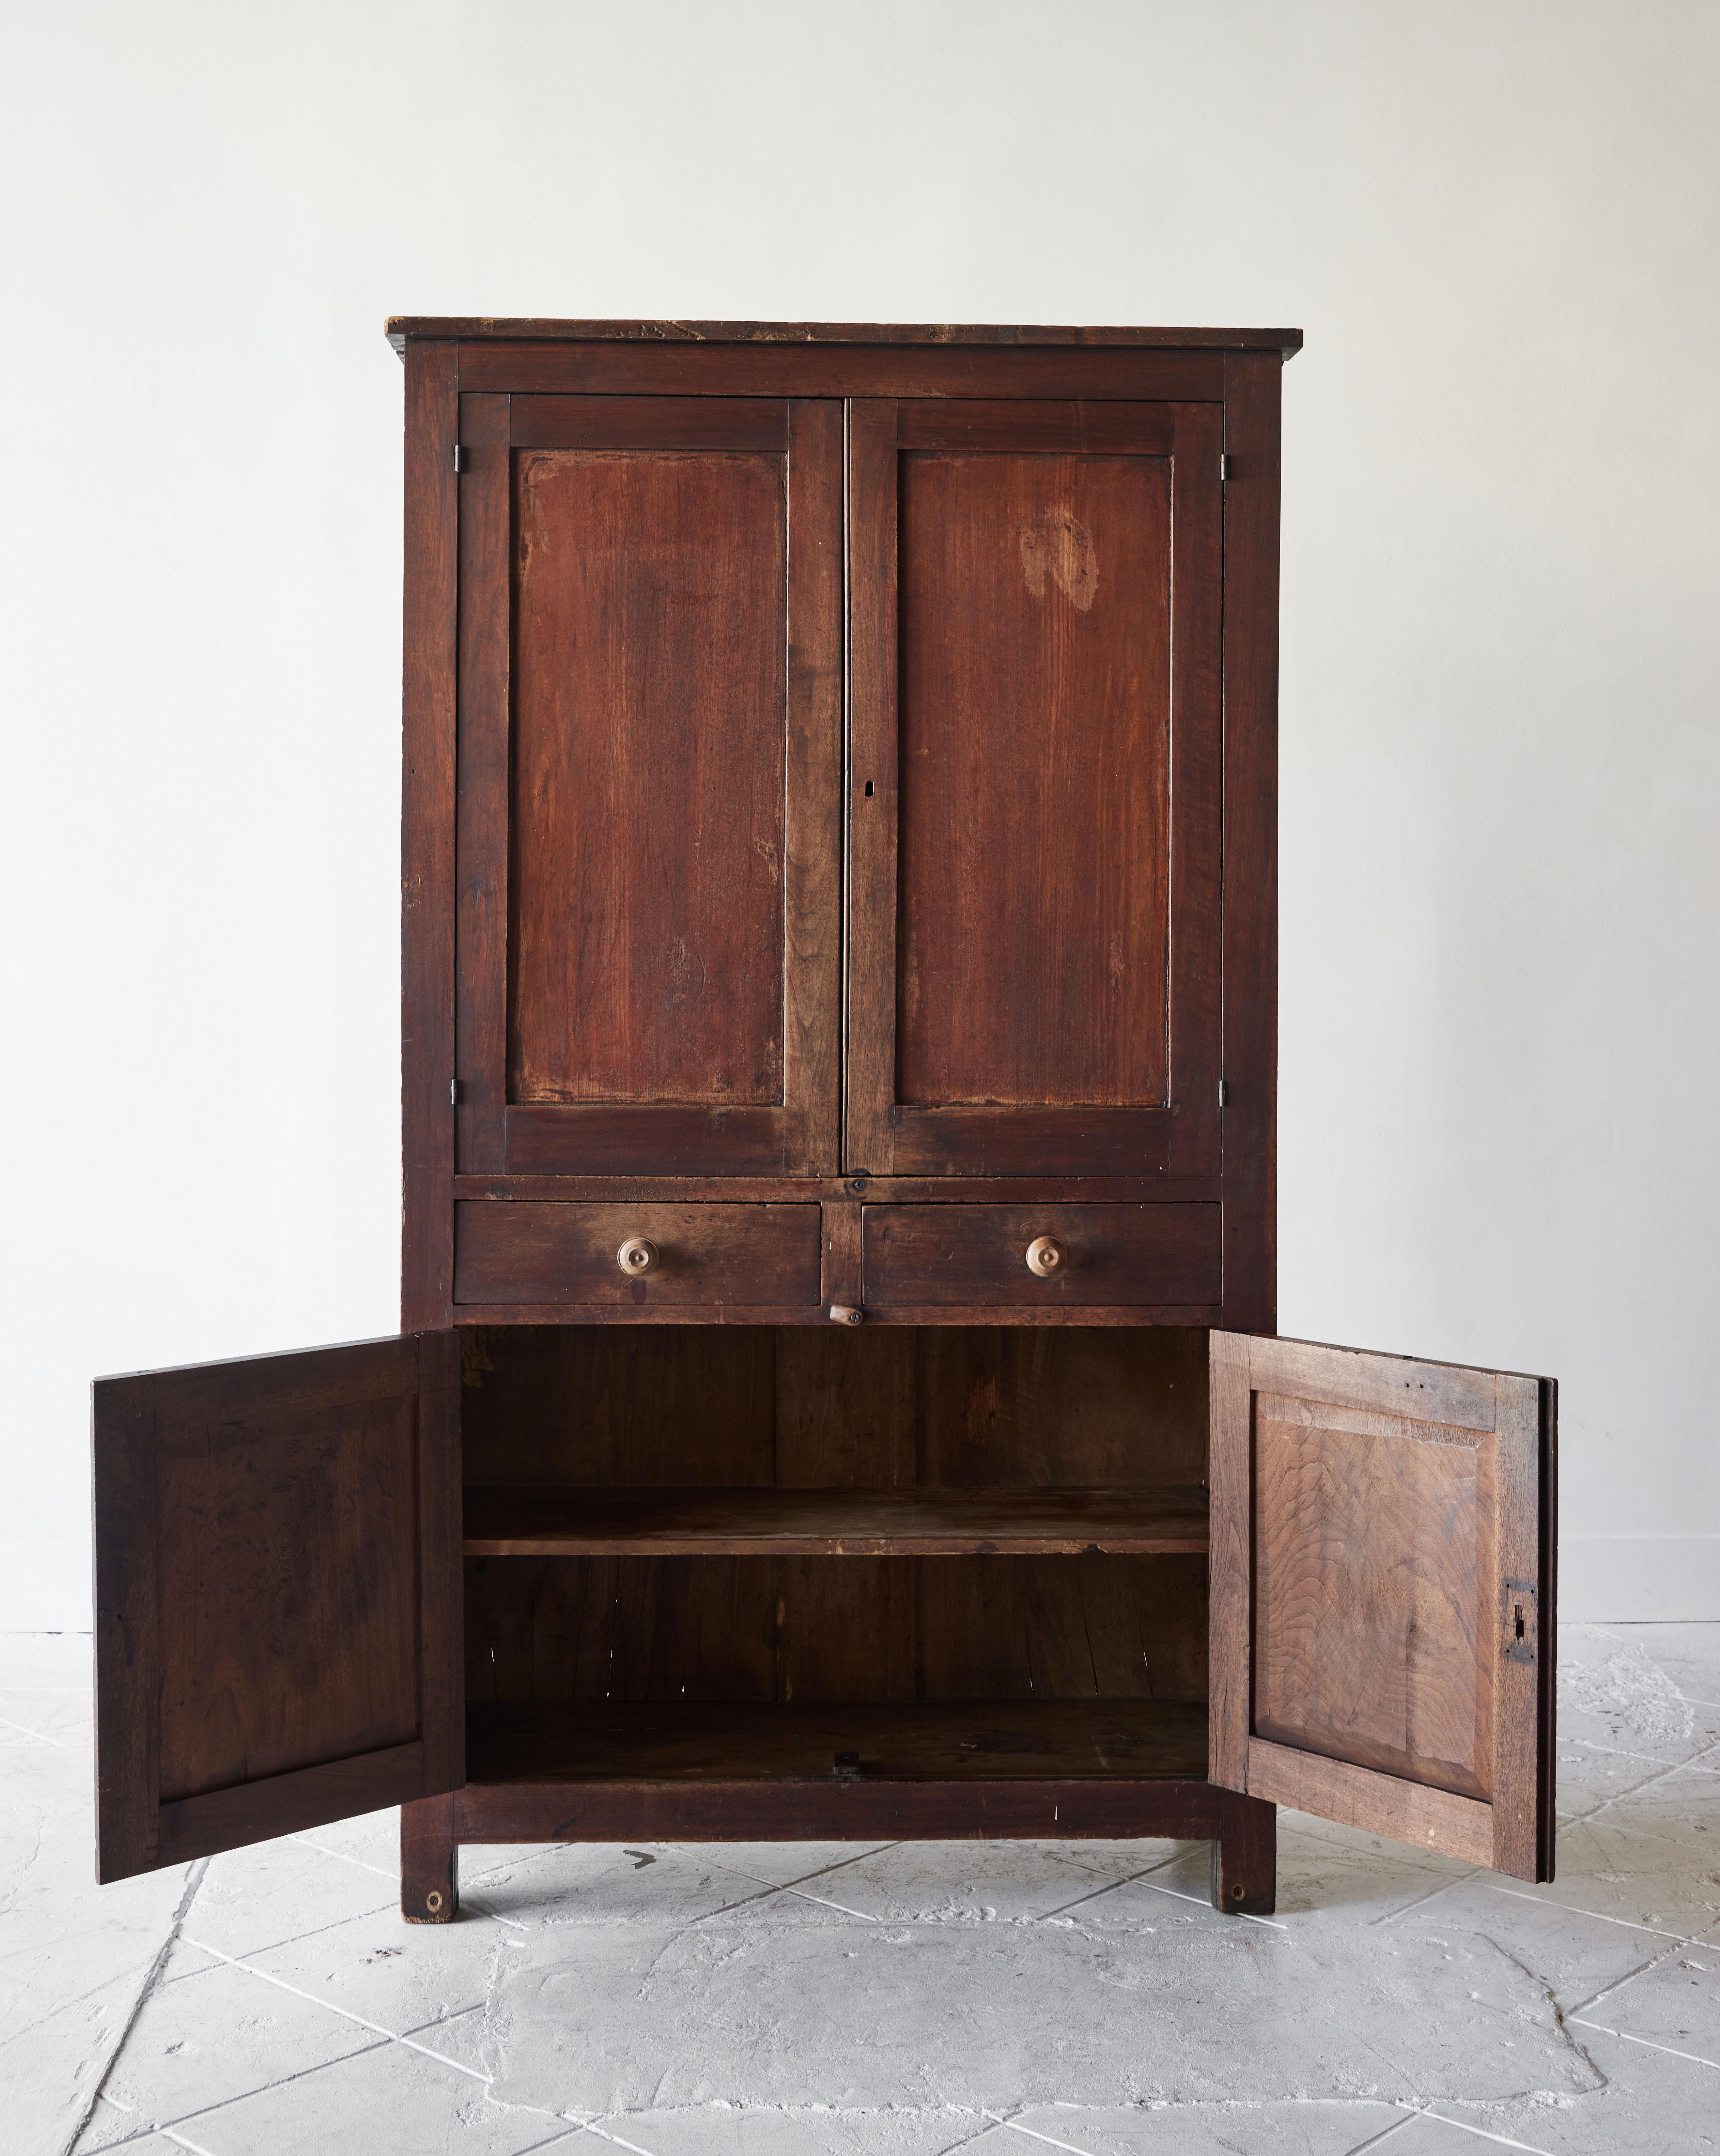 19th Century Early American Walnut Cupboard with Four Doors and Two Drawers